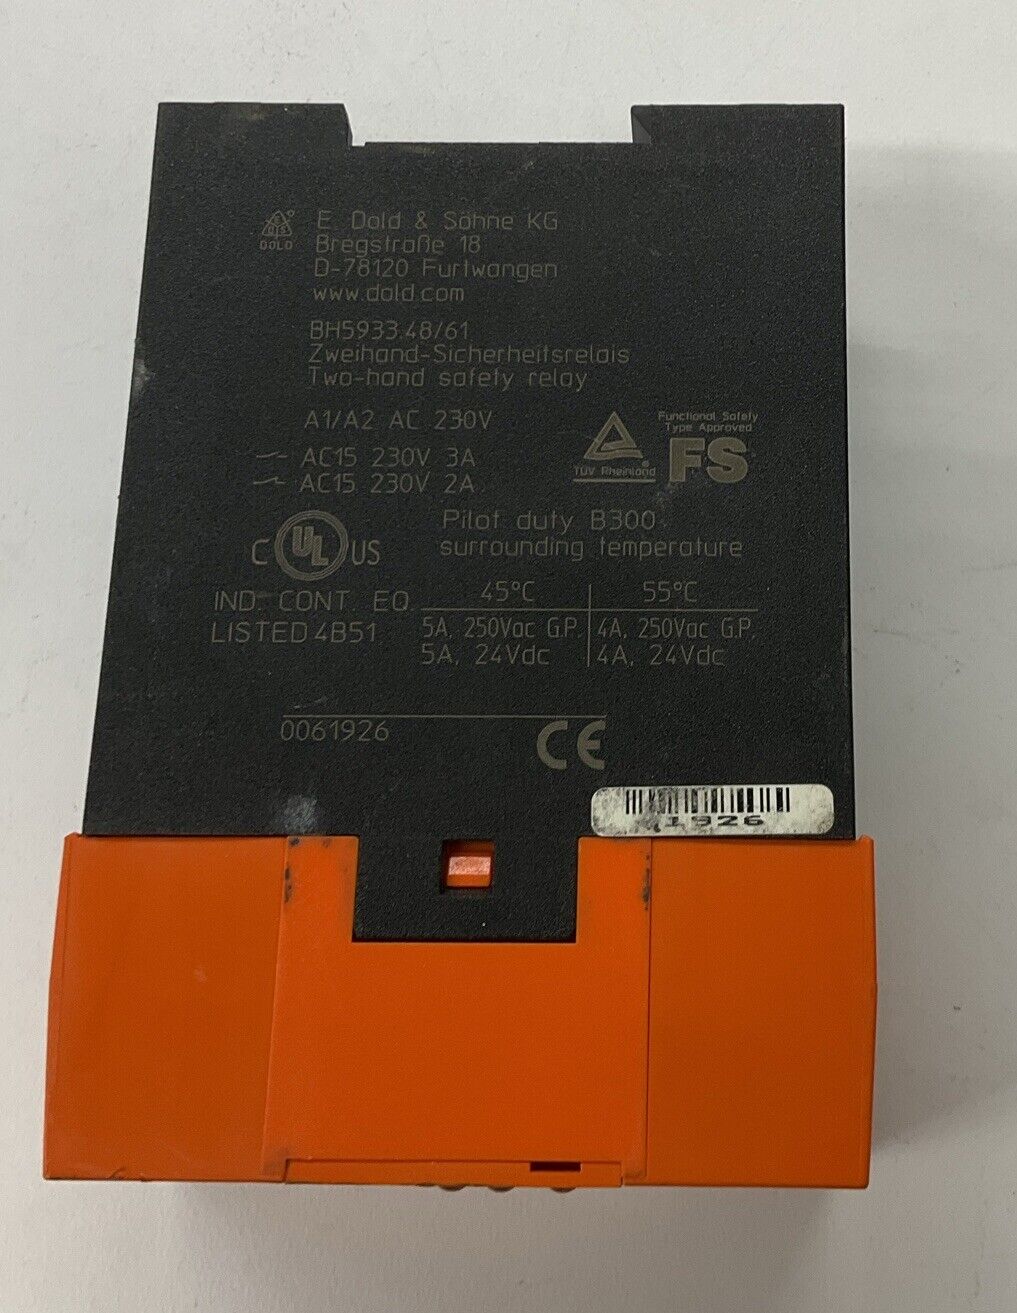 E. Dold & Sohne KG BH5933 D-78120 Safety Relay (BL106) - 0